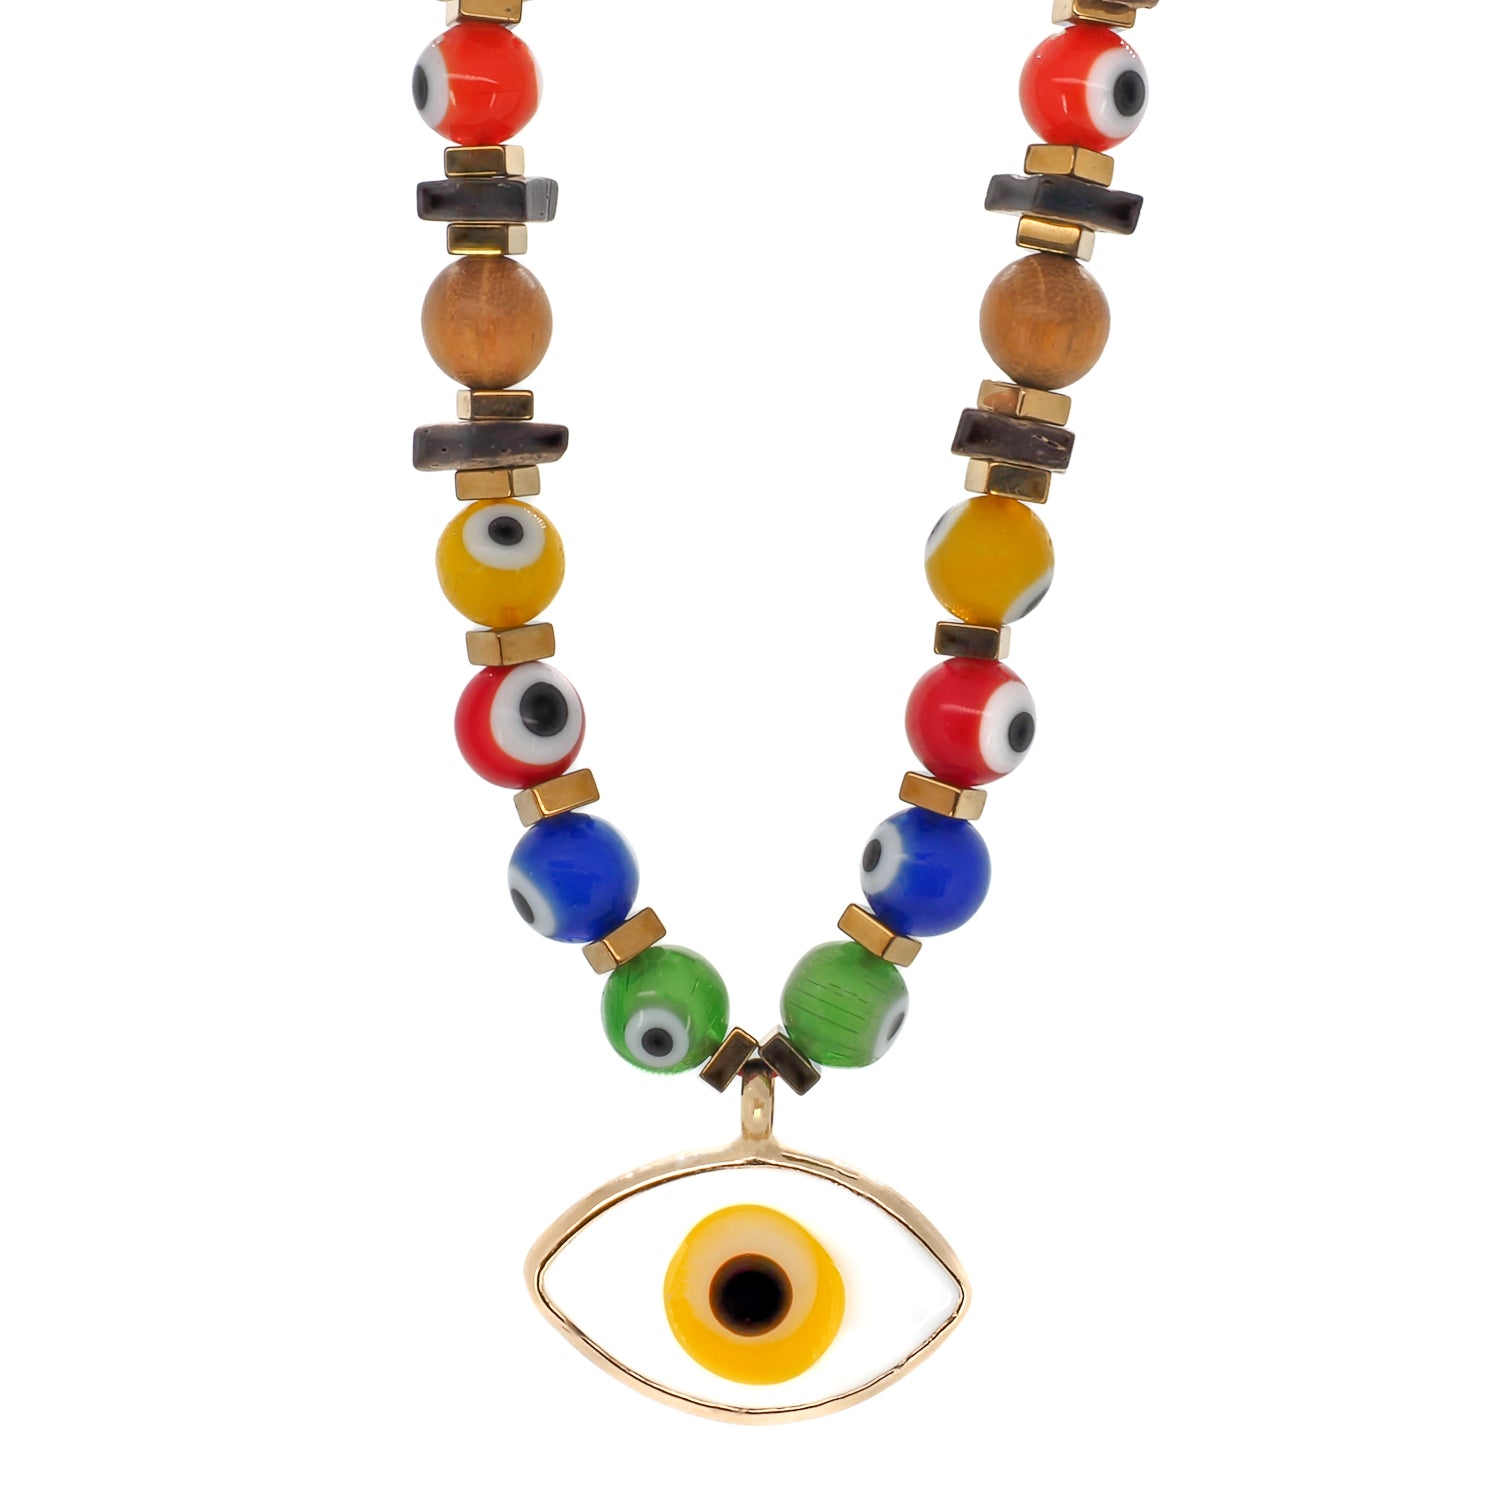 Evil Eye Beaded Necklace - A vibrant and energetic necklace featuring blue, yellow, red, and green glass evil eye beads, as well as gold hematite stone beads and a tree of life pendant. 